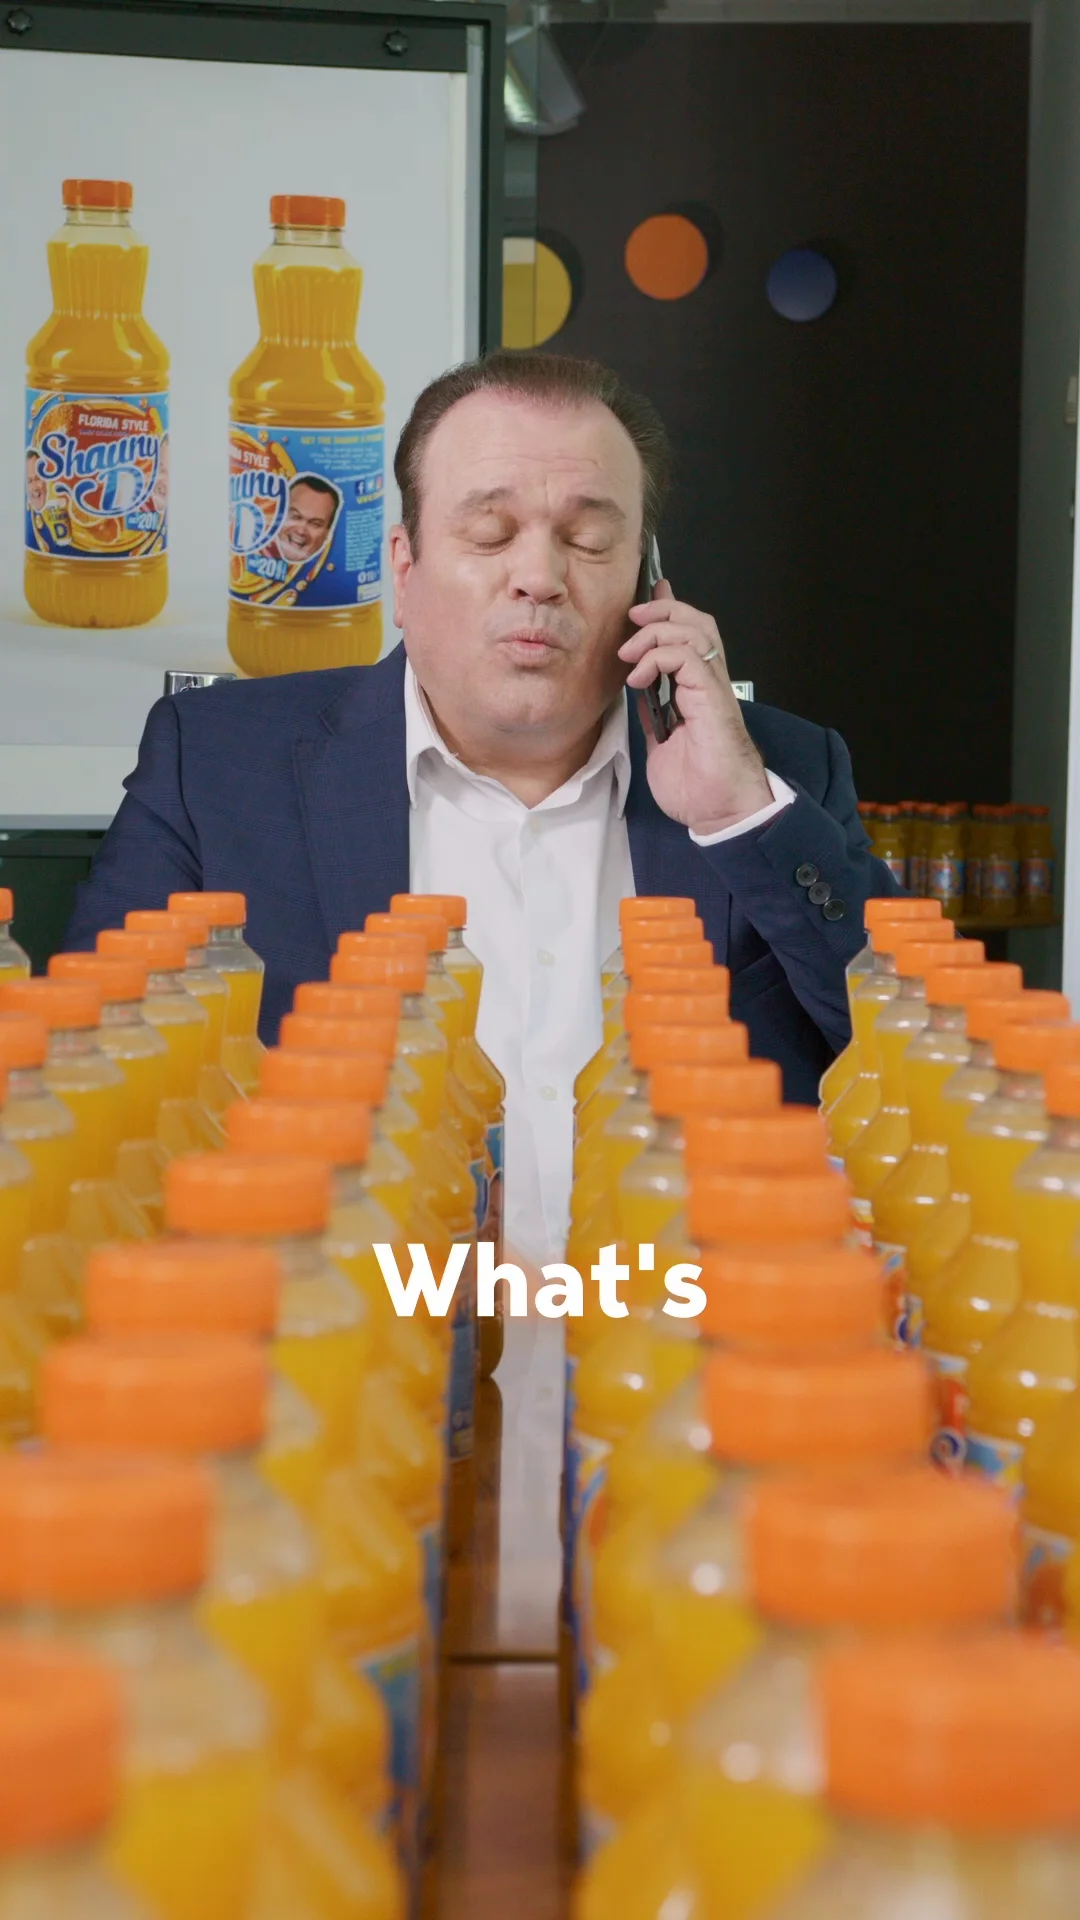 A person talking on a cell phone in front of a row of orange juice bottles